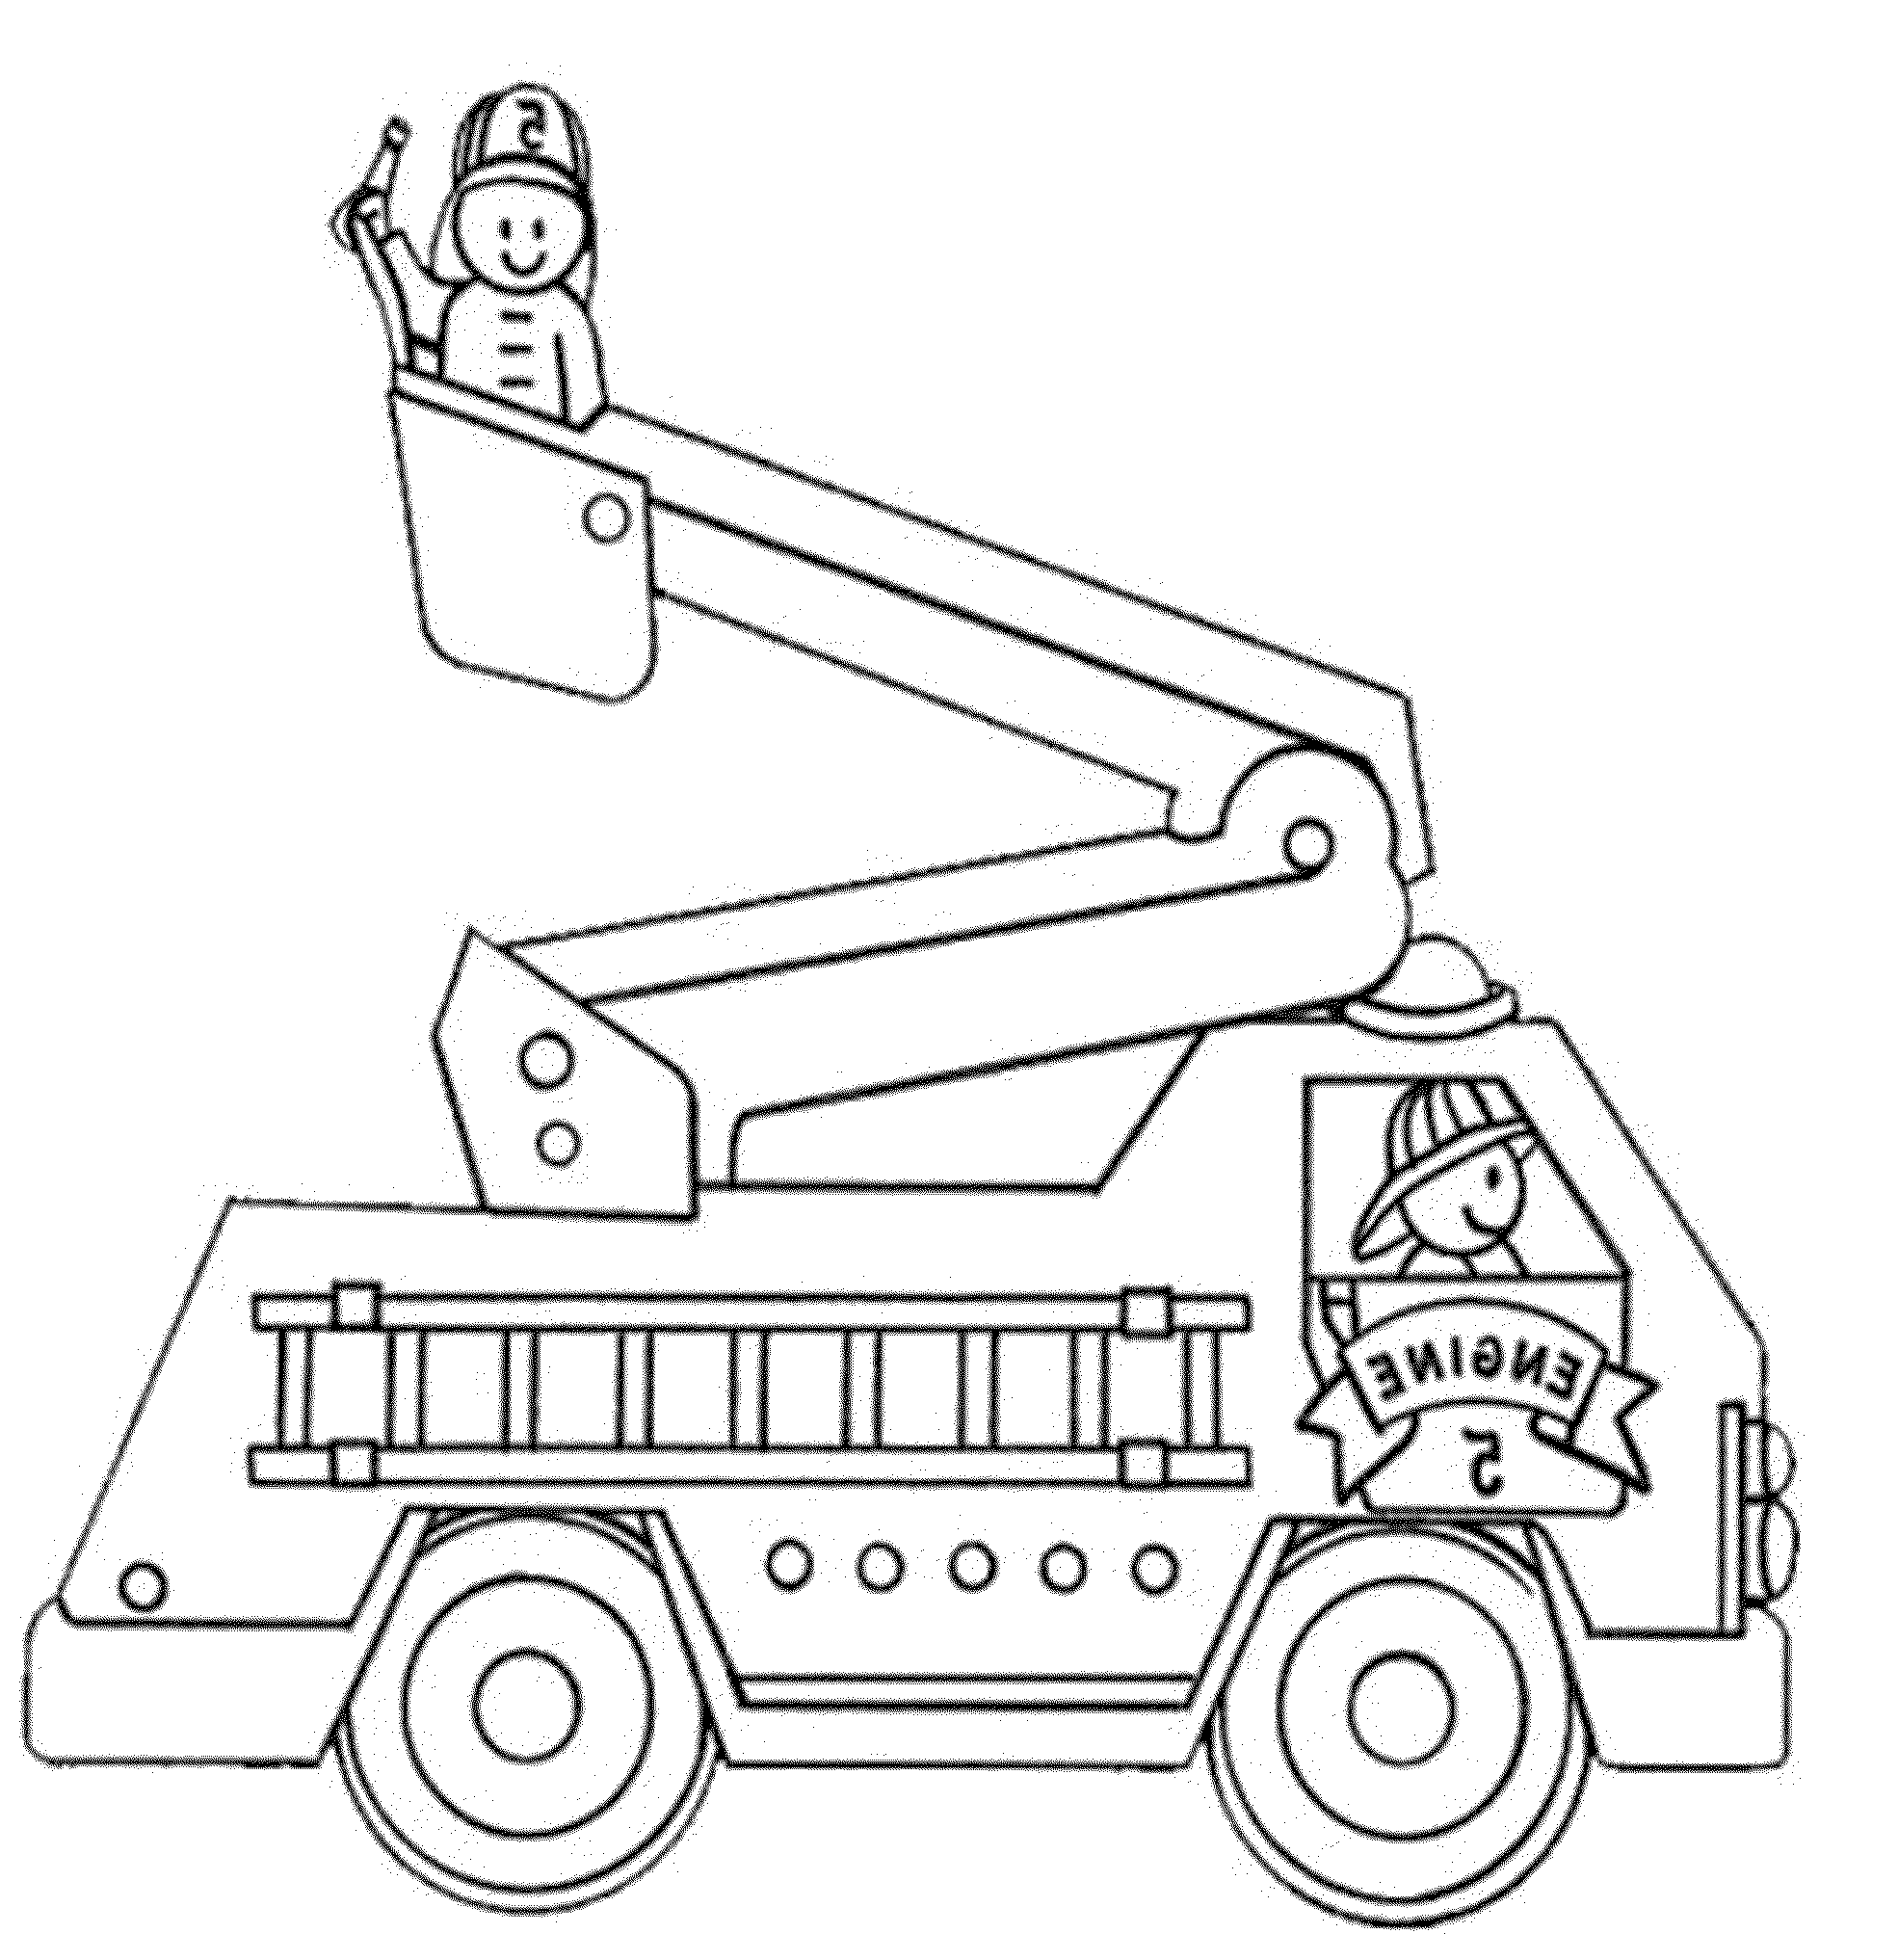 Download Firetruck (Transportation) - Printable coloring pages